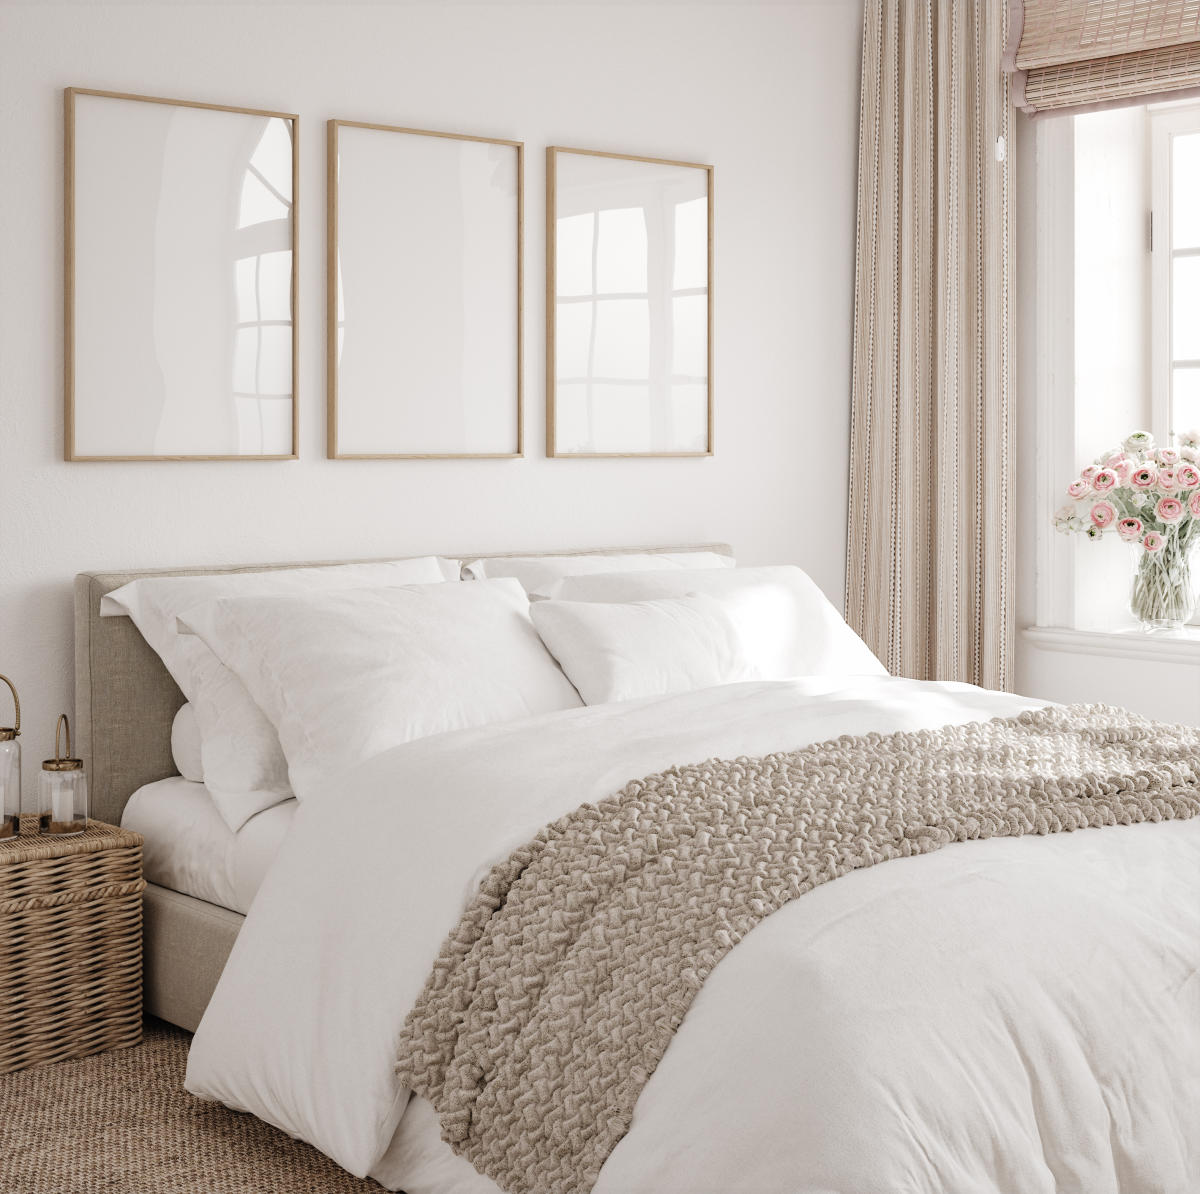 #Up to 80% off mattresses, pillows, dressers and more